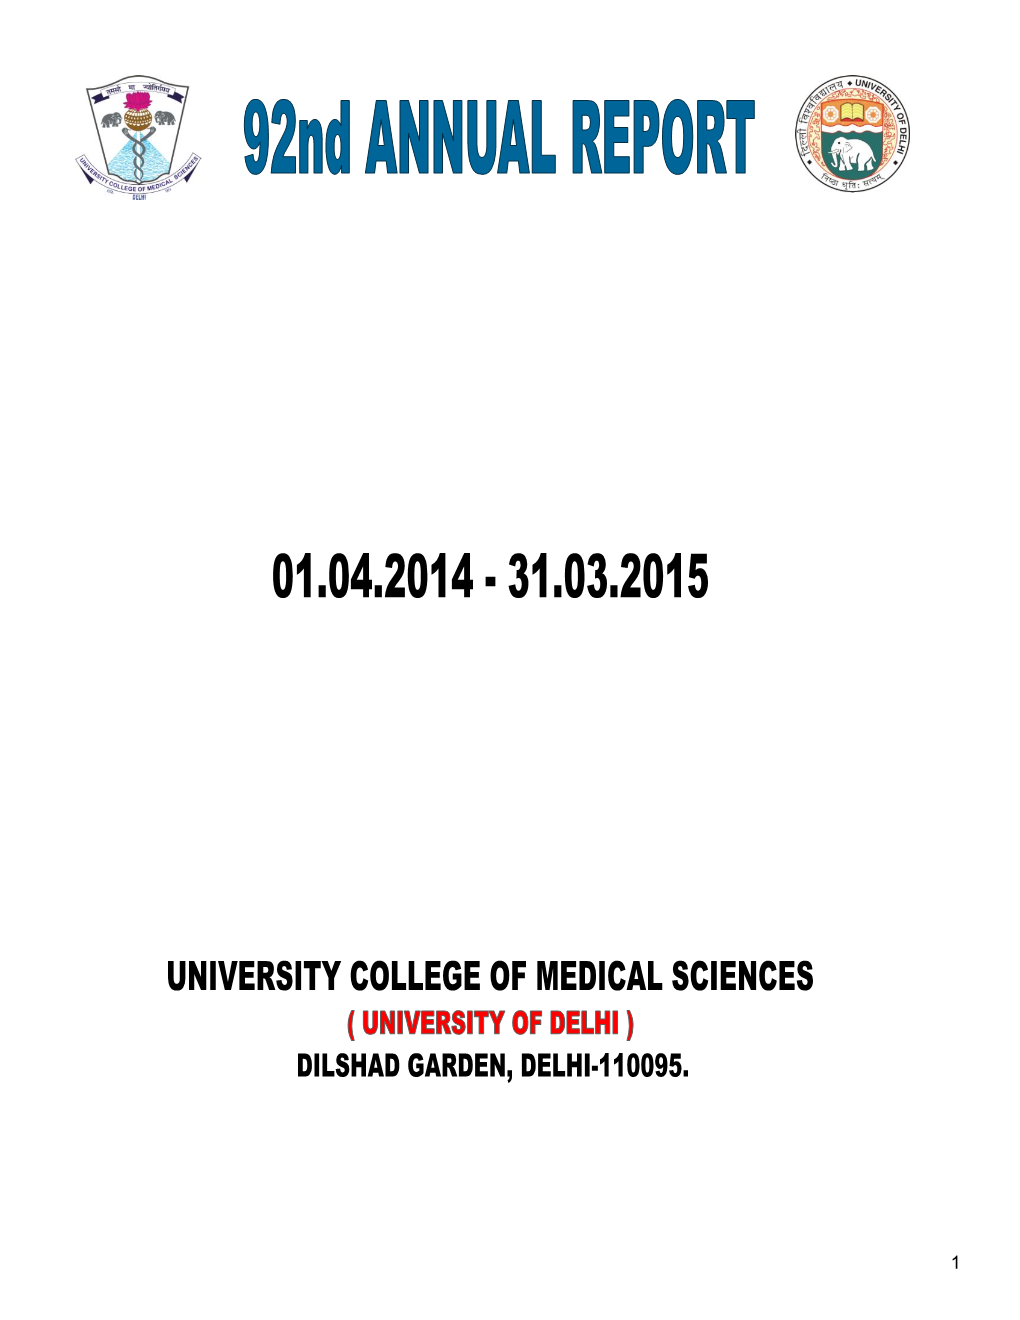 University College of Medical Sciences & G